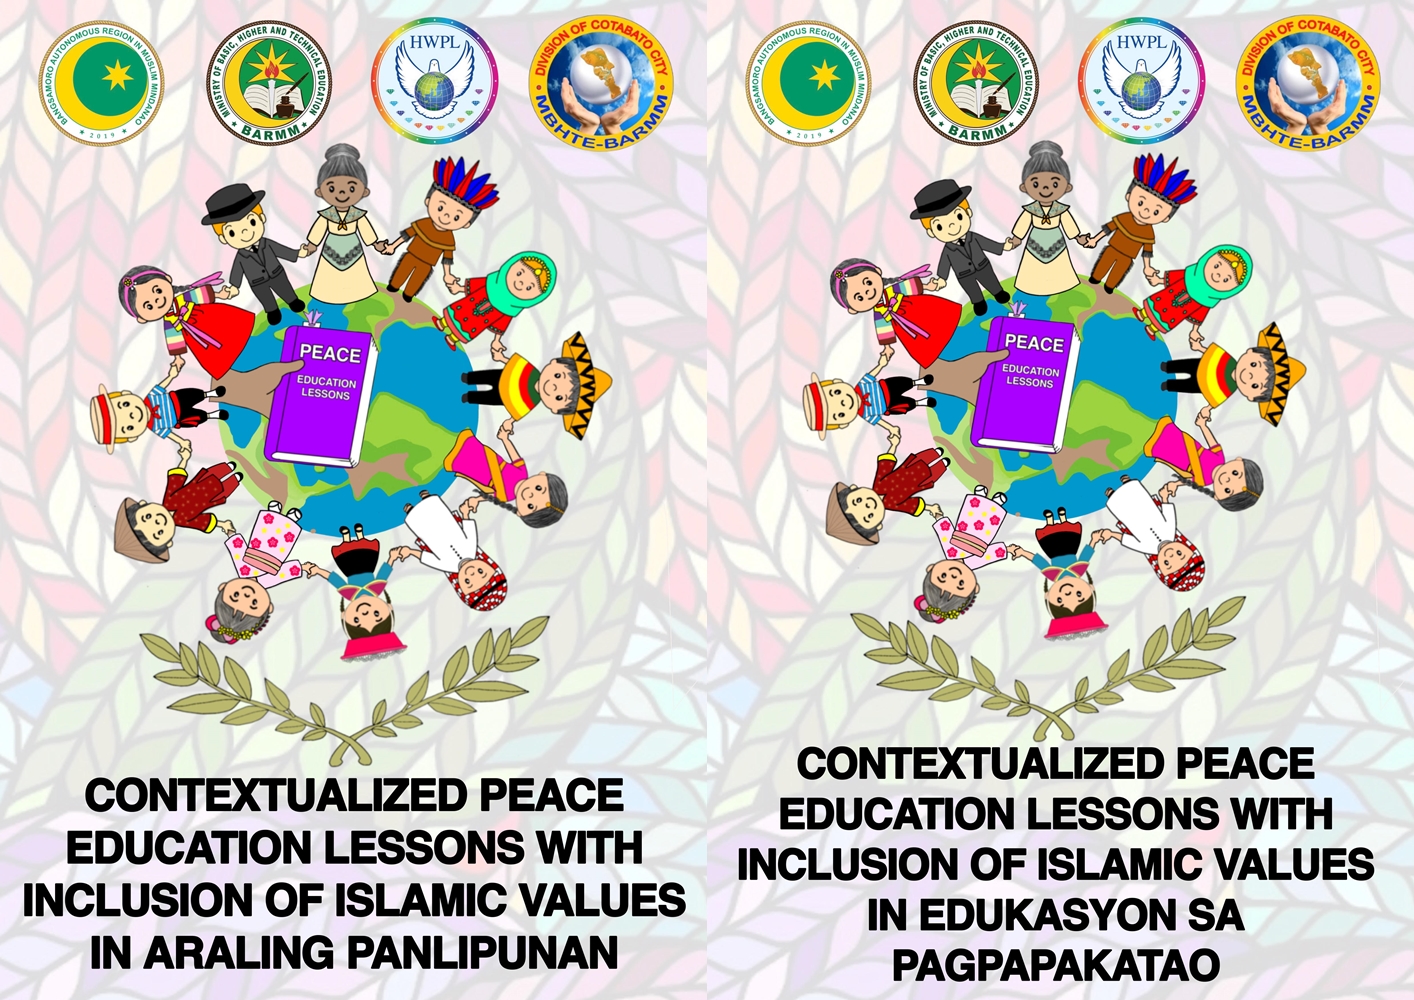 HWPLs 8th Annual Commemoration of the Declaration of Peace and Cessation of War DPCW